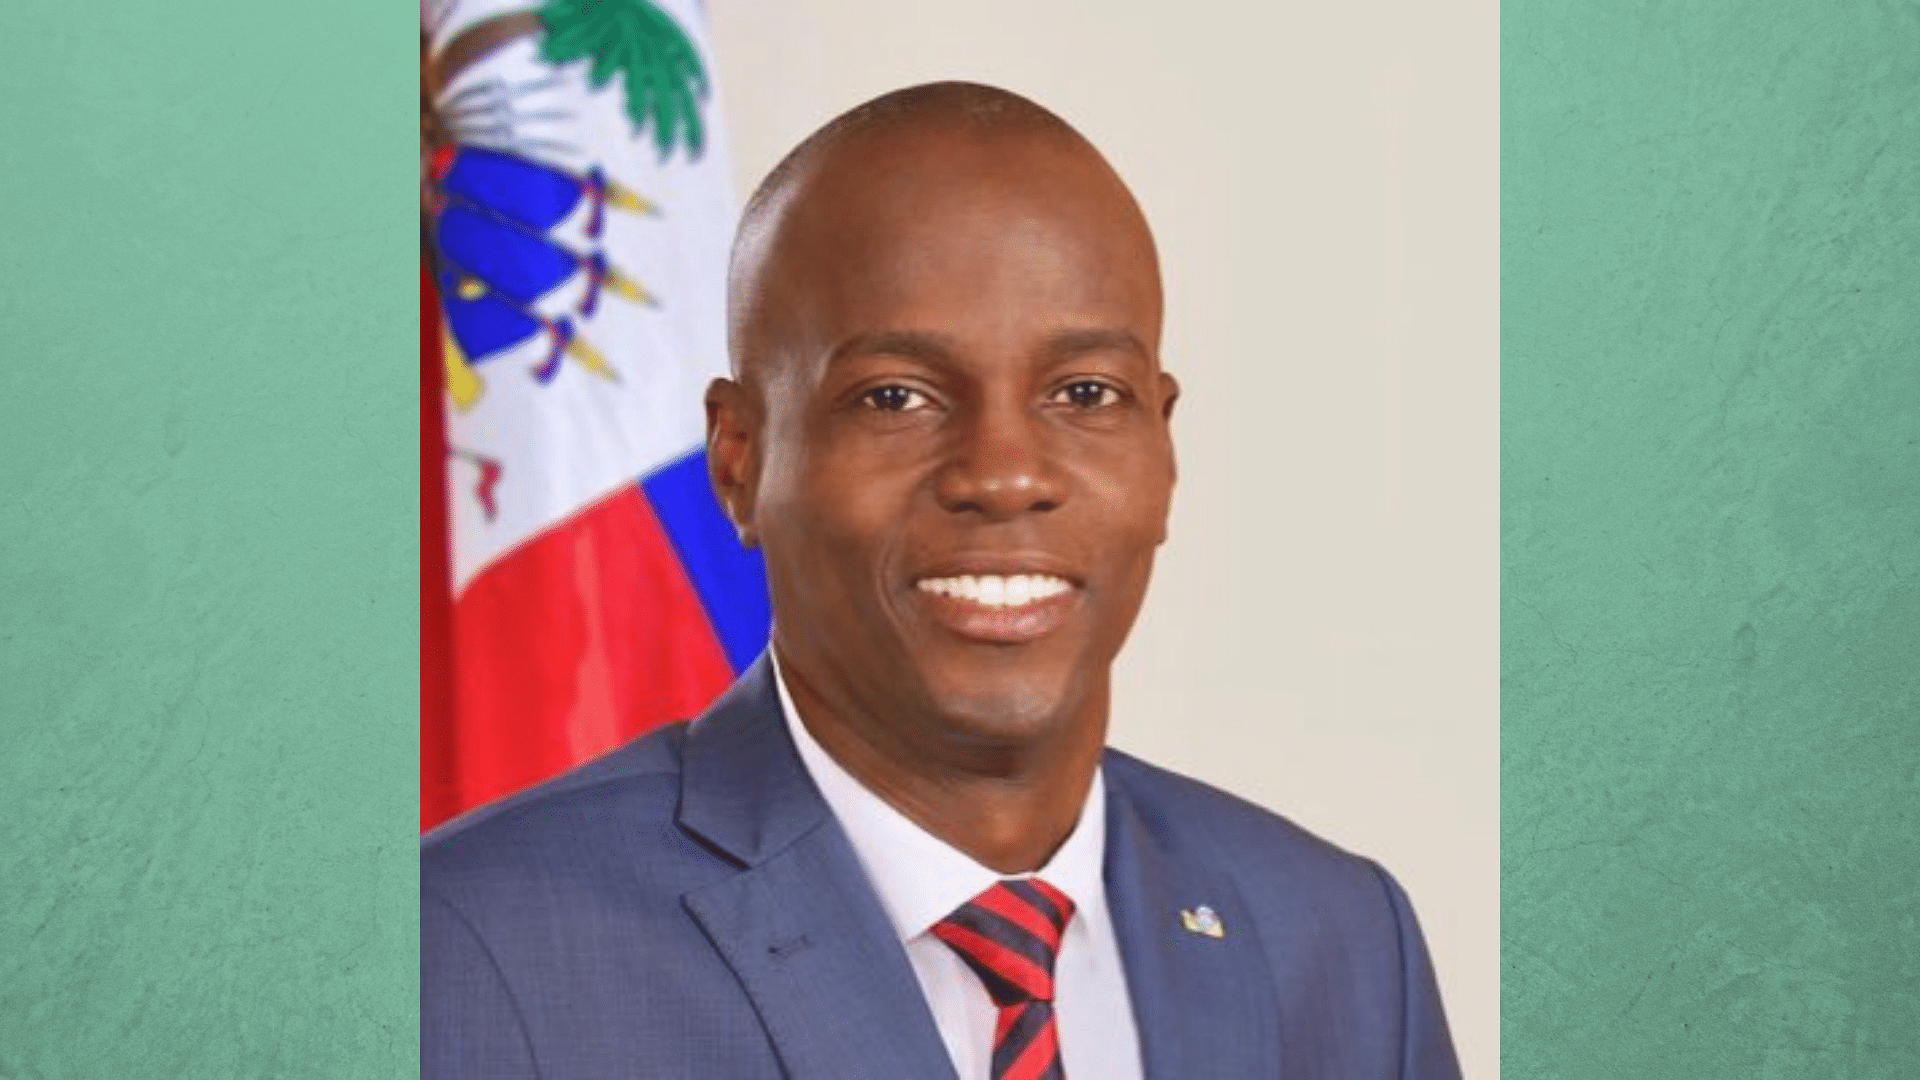 <div class="paragraphs"><p>It has been 5 days since the Haitian President has been assassinated, the country is in turmoil as politicians scramble for power.</p></div>